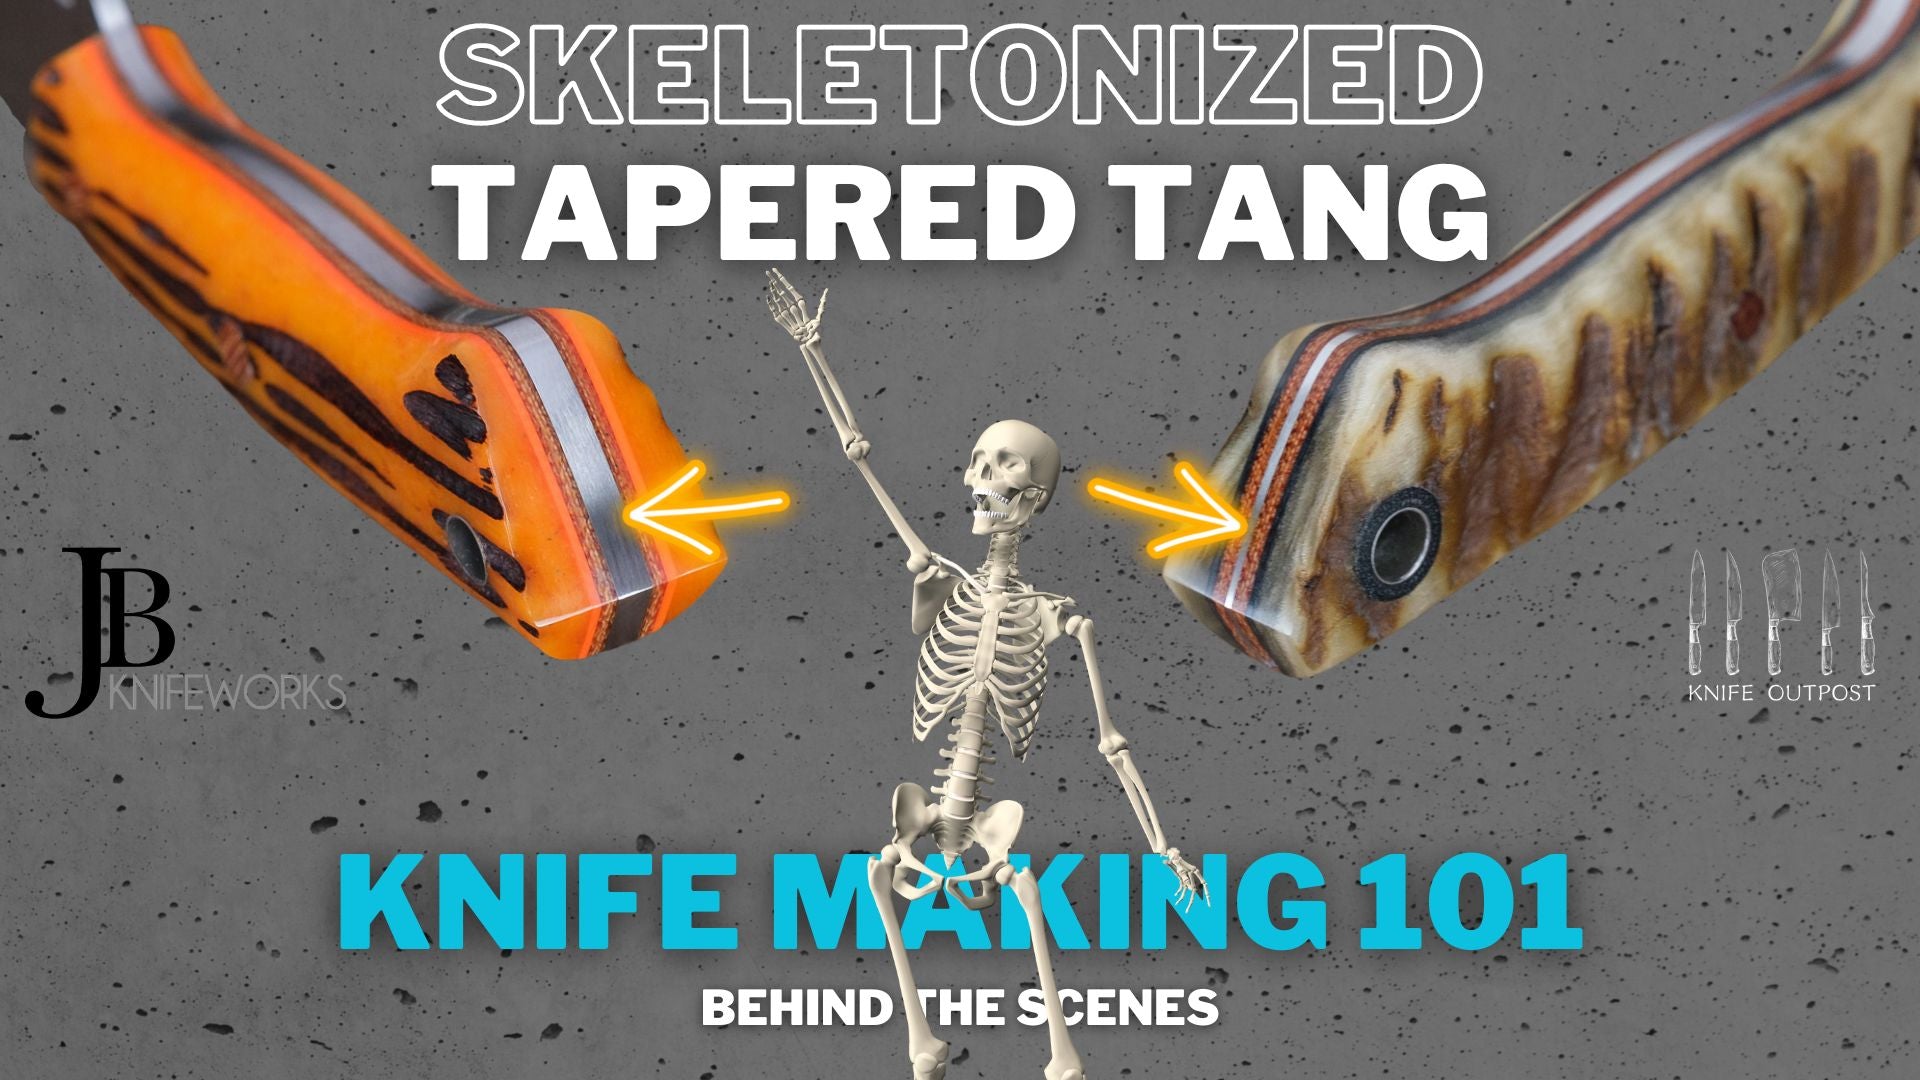 Knife Making 101: How Skeletonized Full Tang and Tapered Tang Knives Are Made